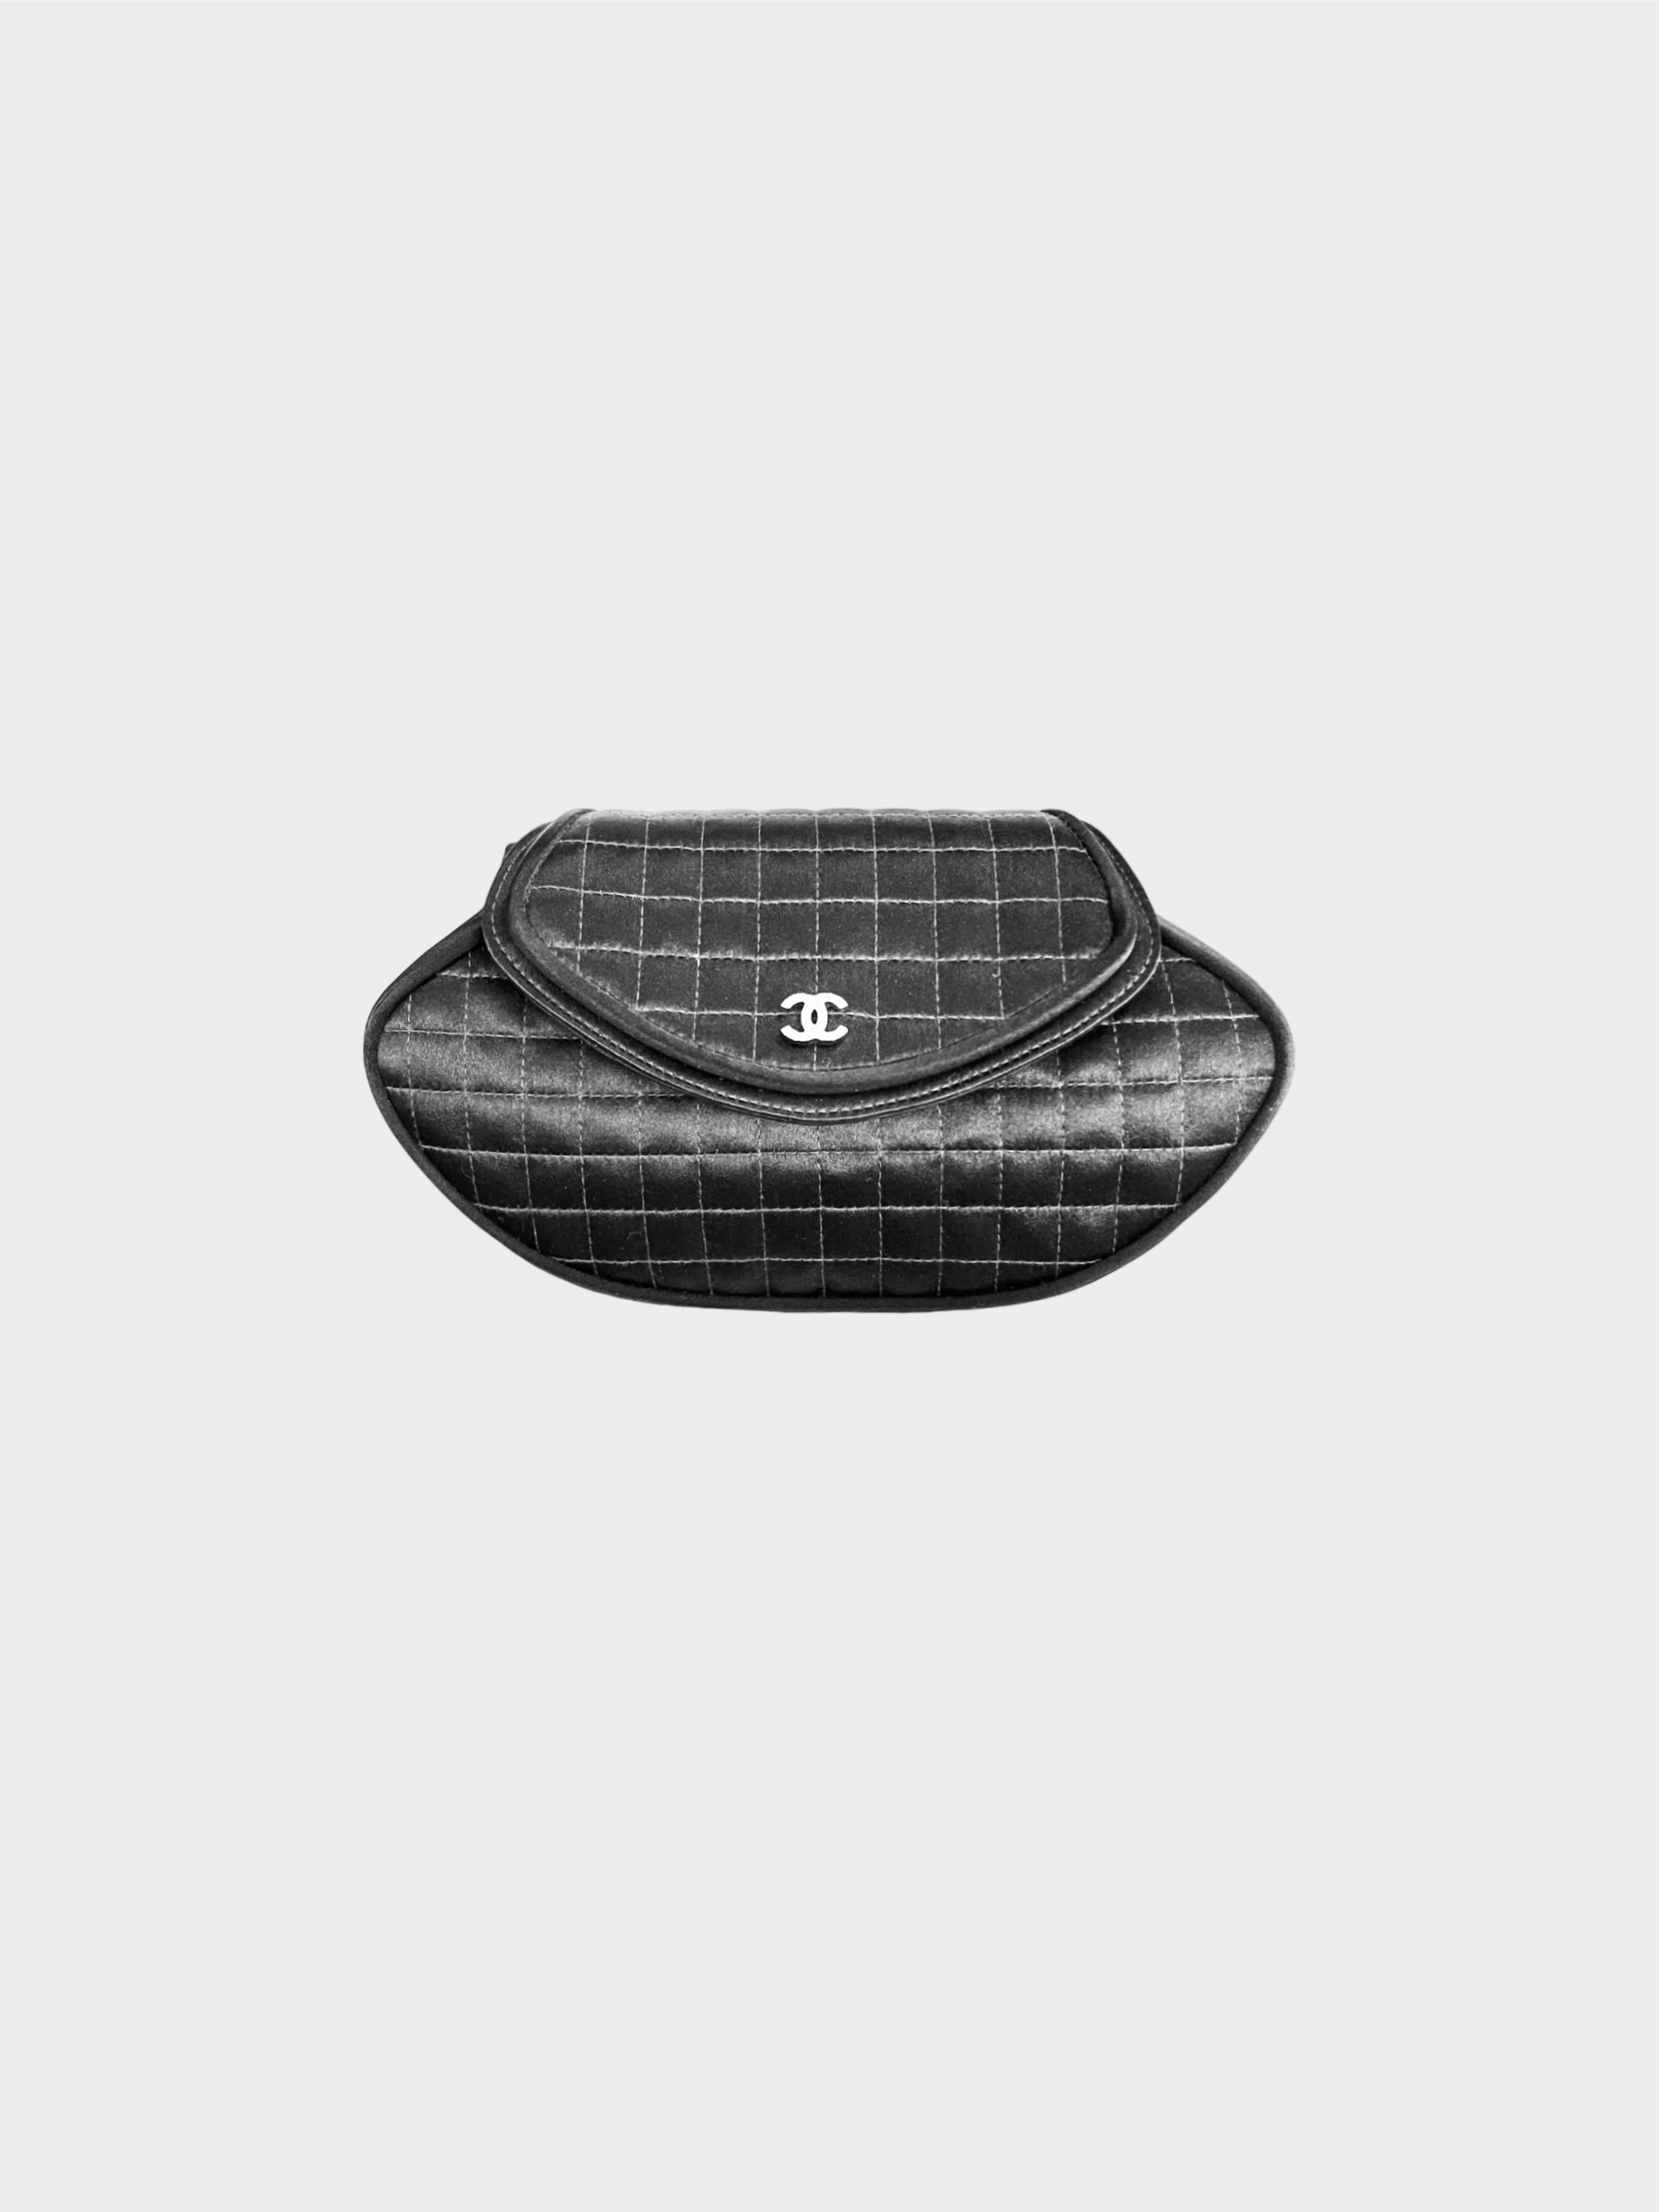 Chanel 2004 Black Quilted Satin Wristlet